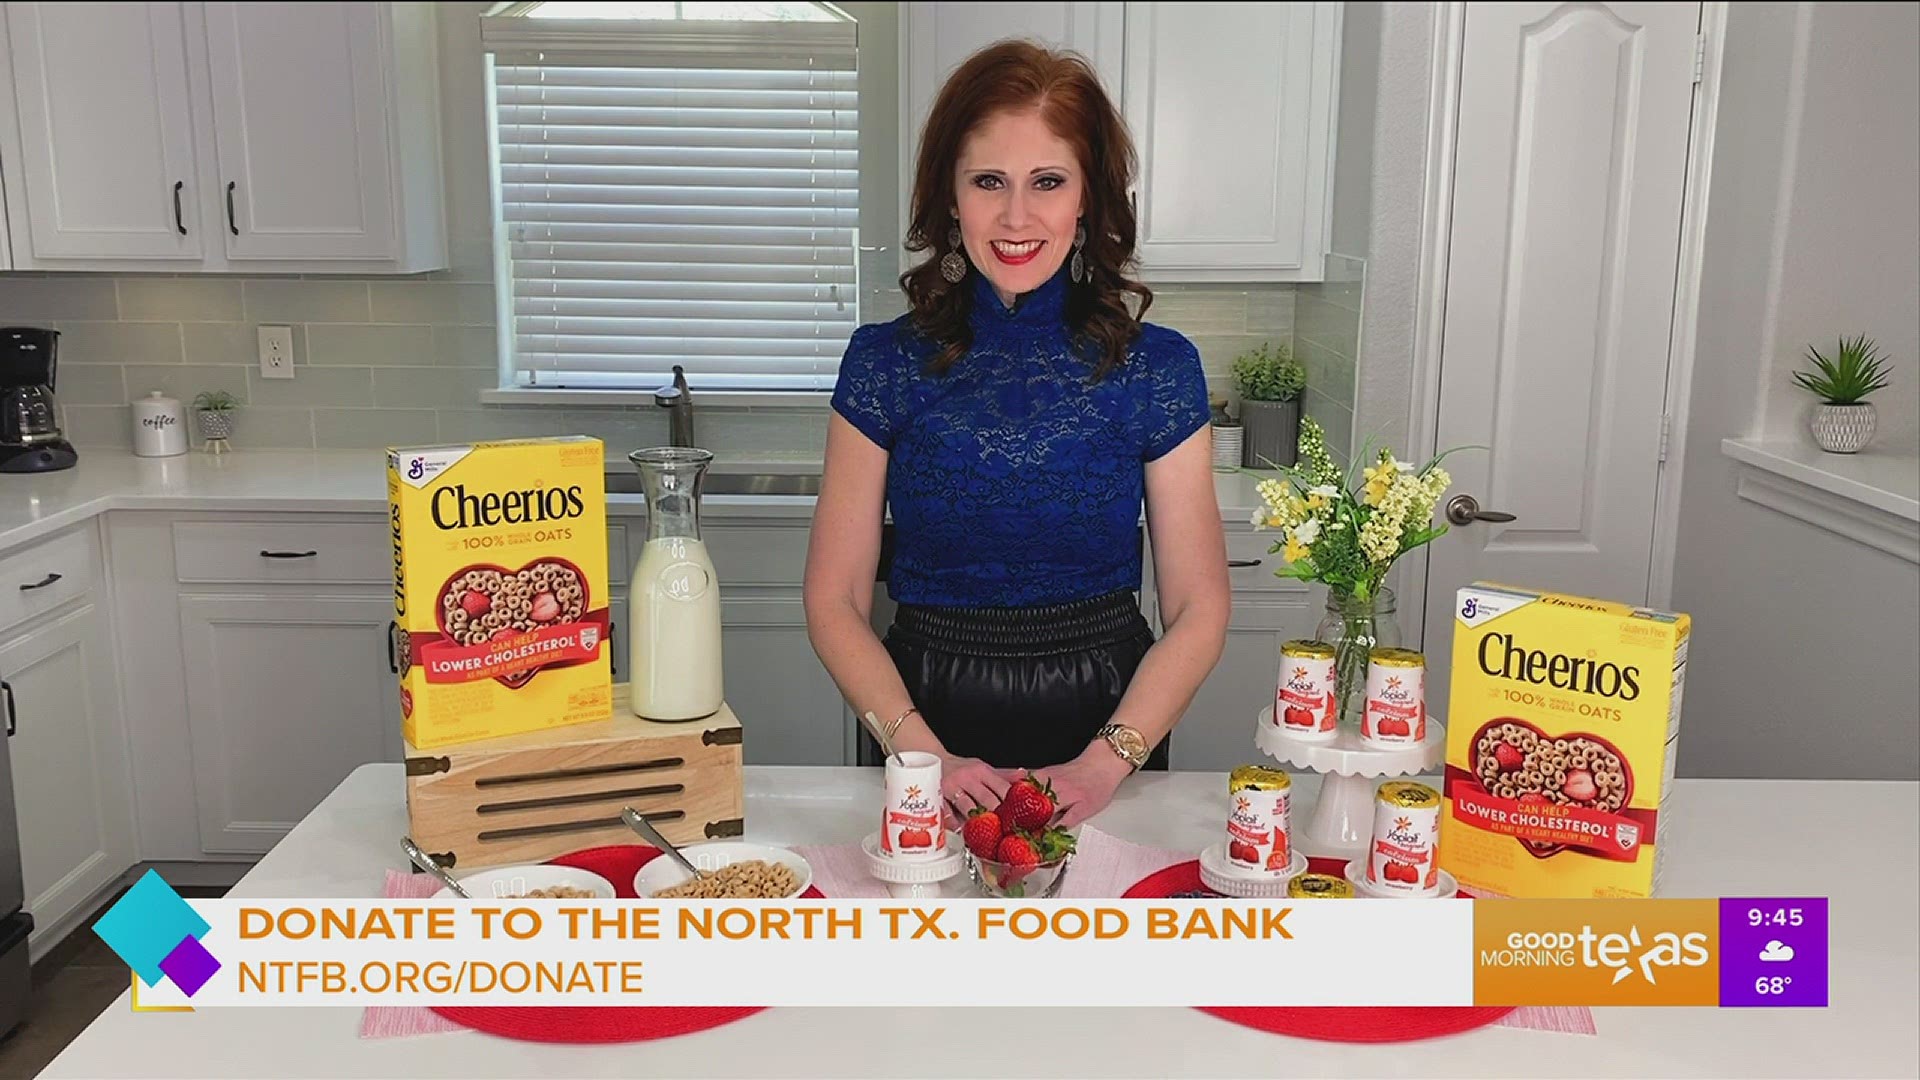 Amy Goodson shares tasty breakfast options and how to give back